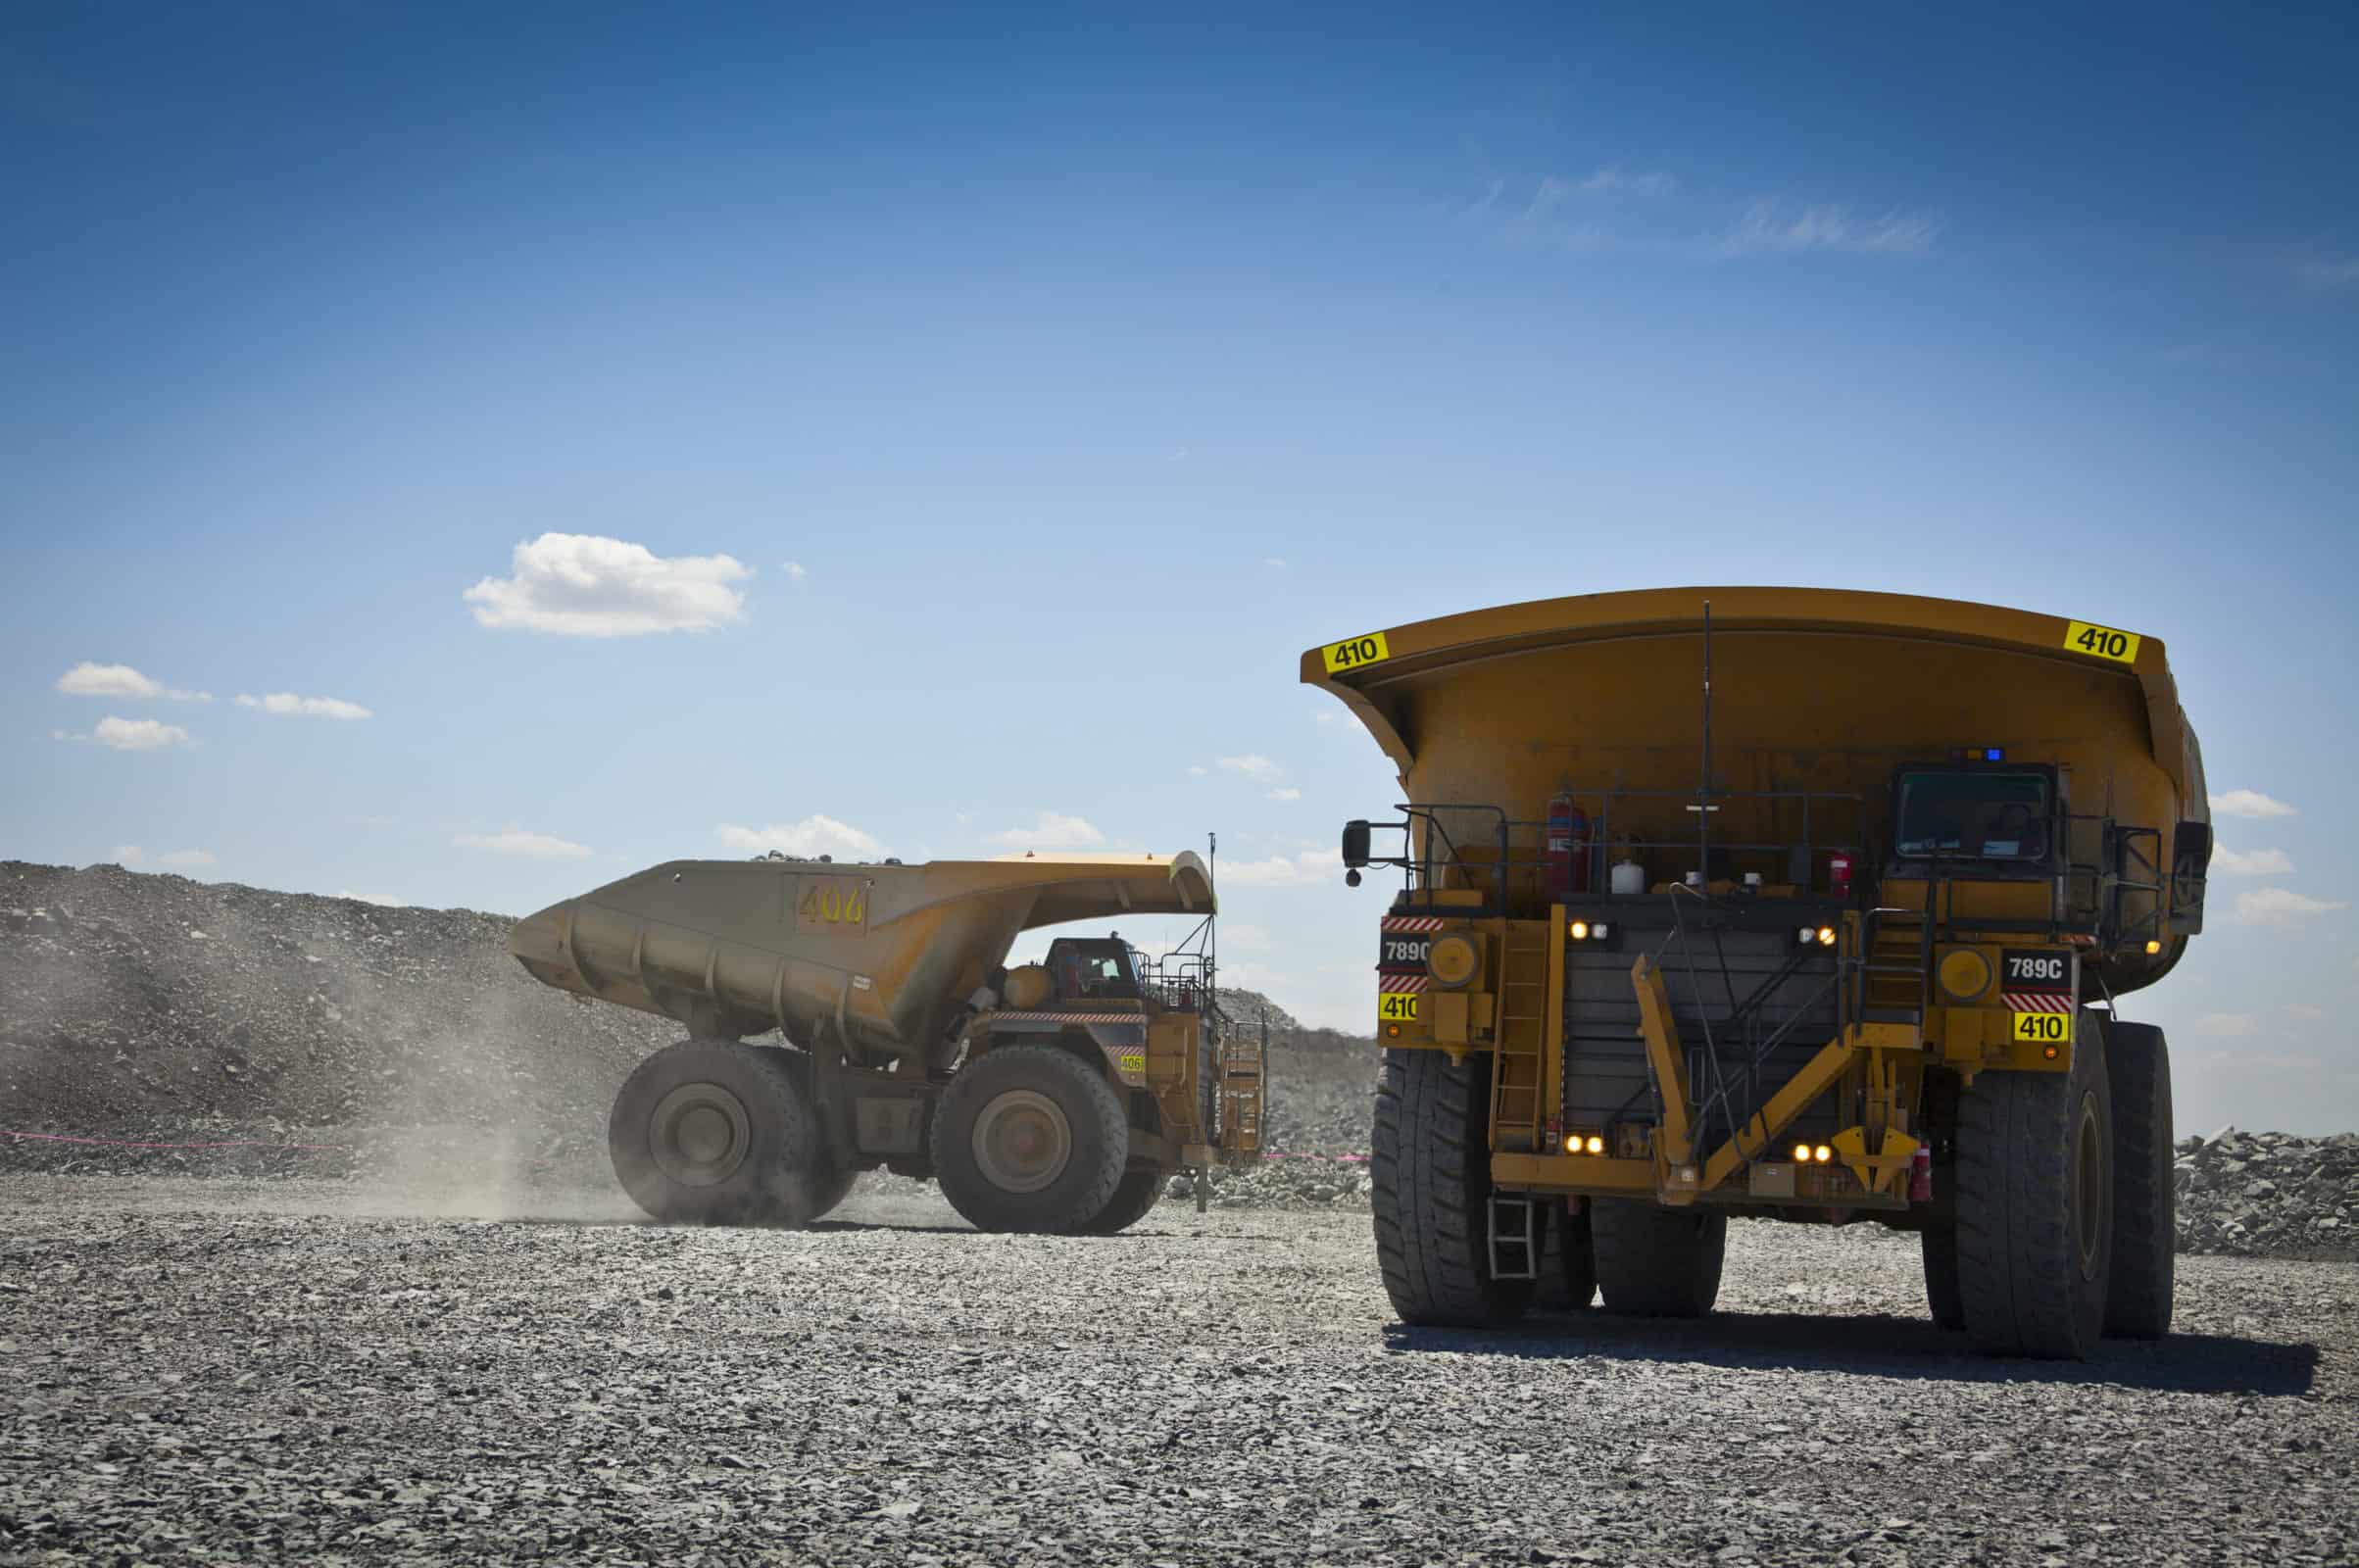 Novecom - Large trucks transport gold ore from open cast mine. Barrick Cowal Gold Mine in New South Wales, Australia.